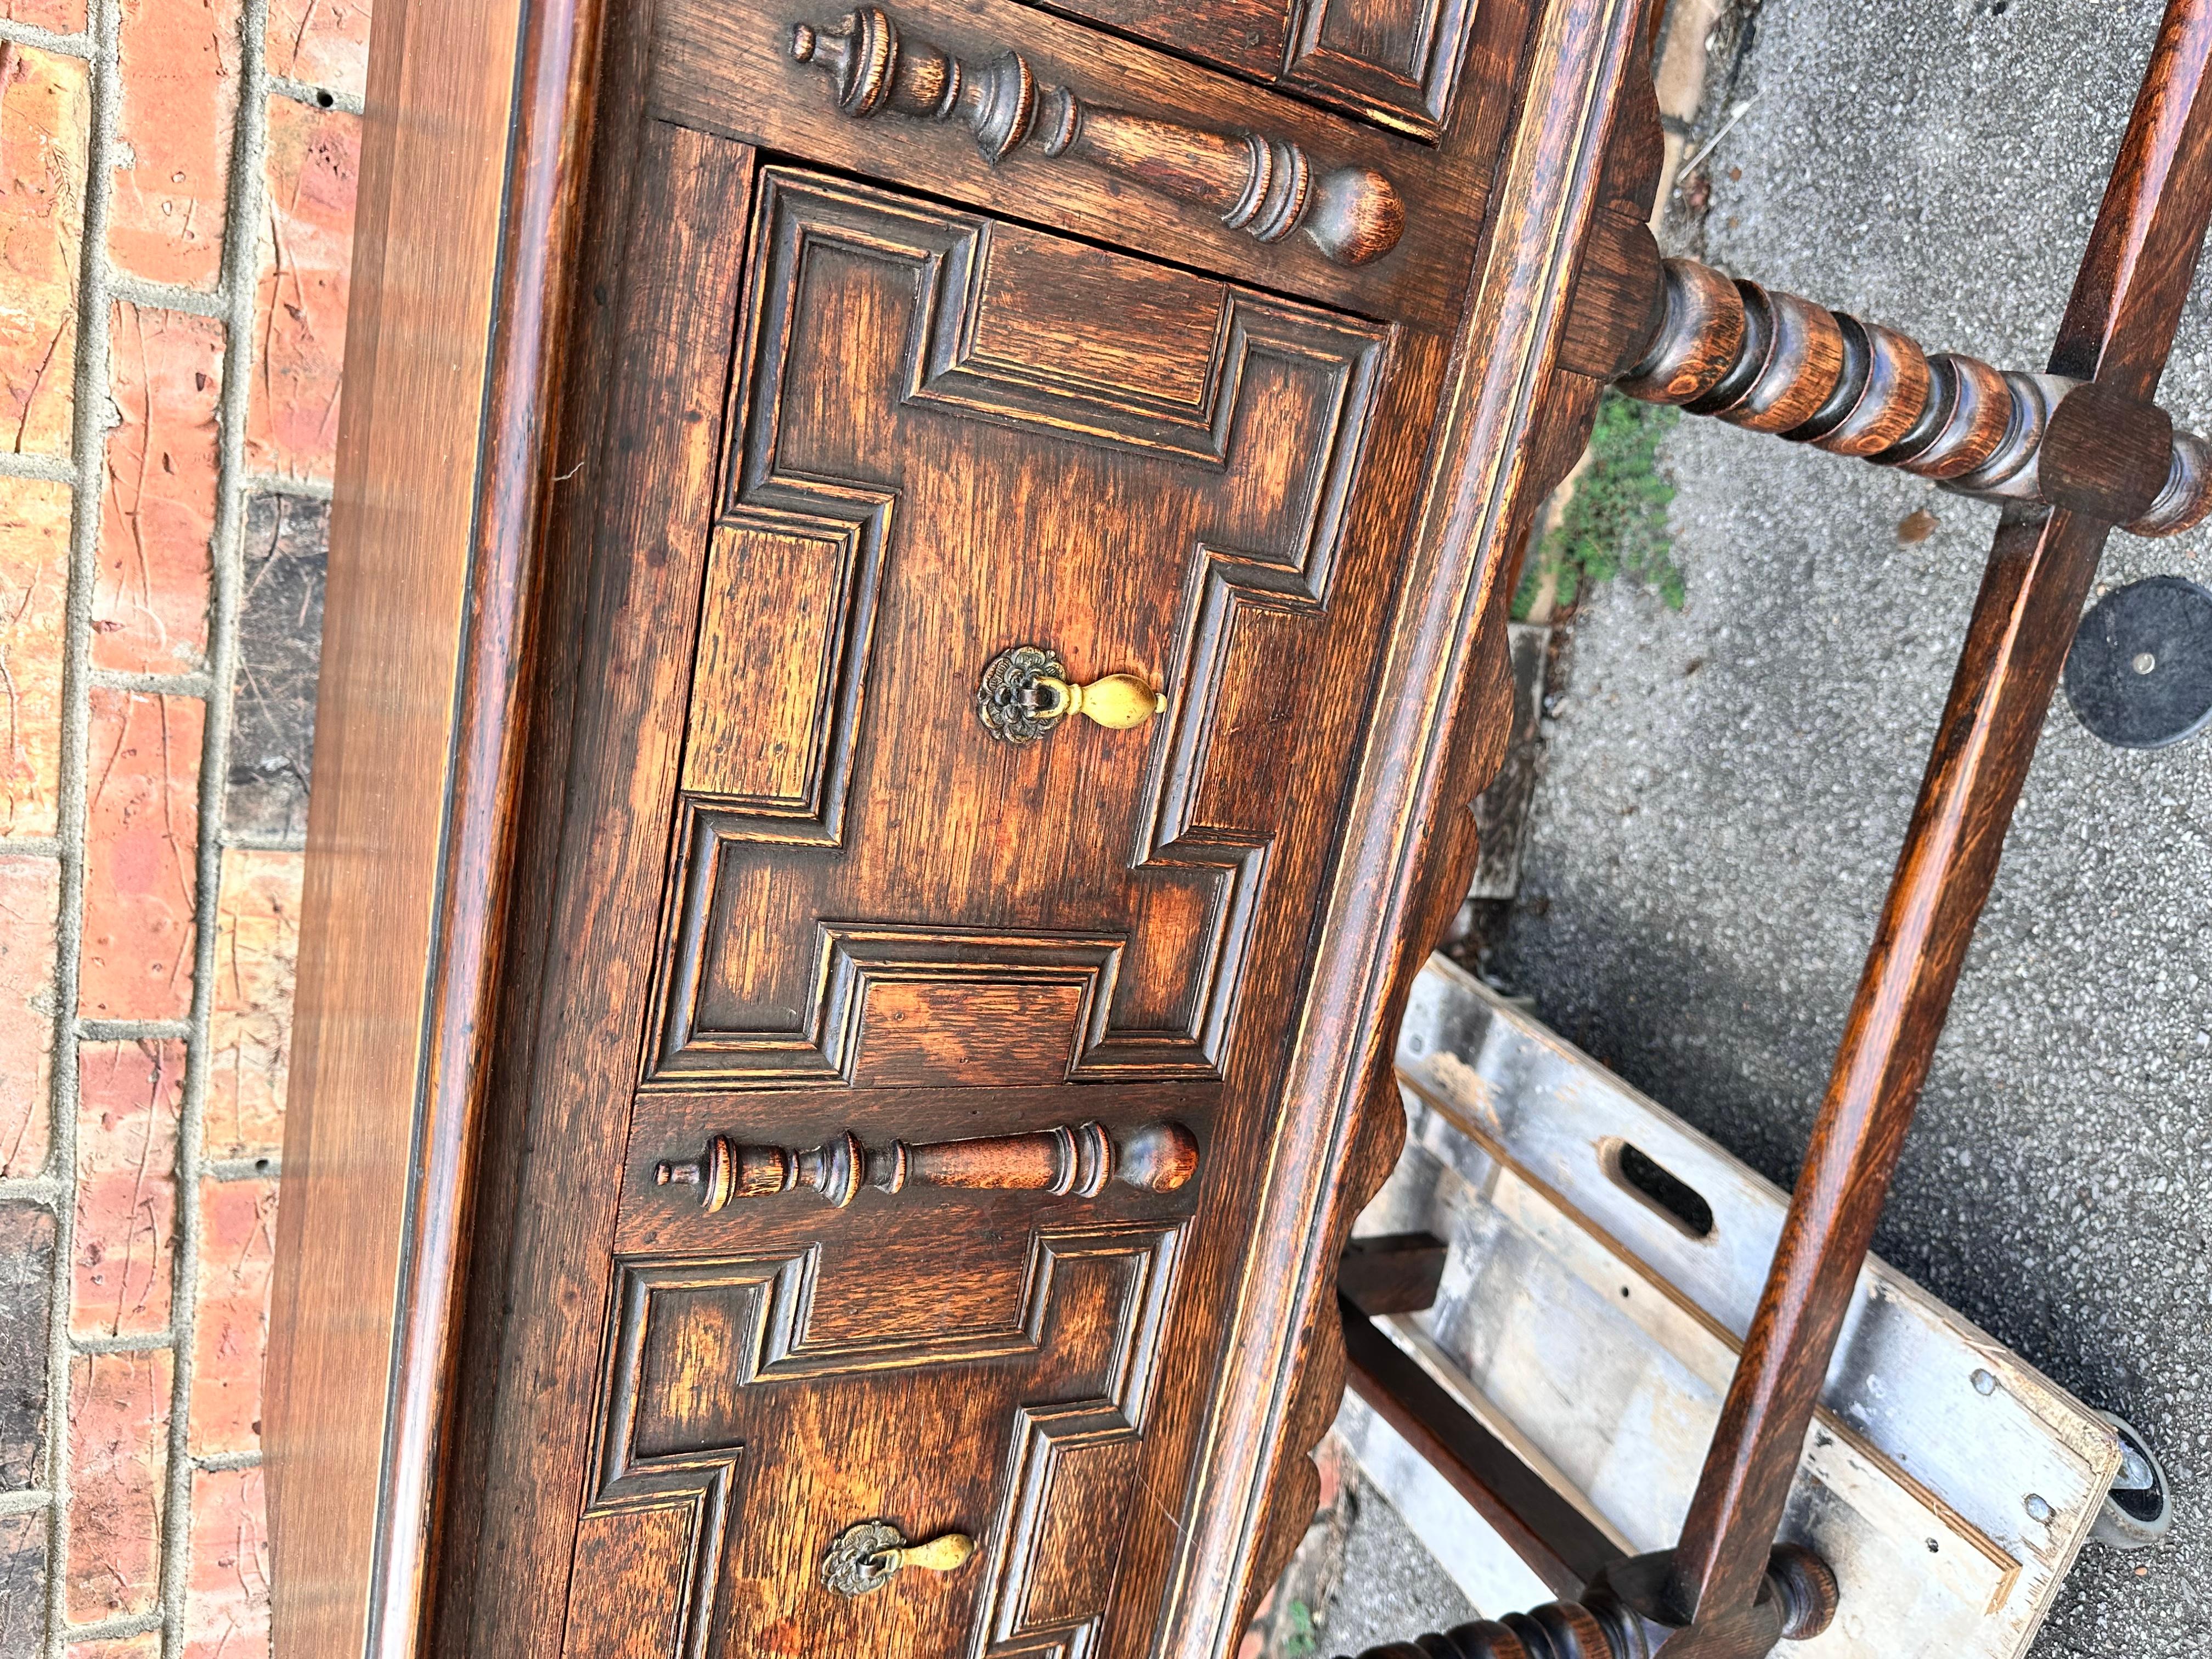 This is a beautiful Jacobean style server with amazing patina and wood color. Features two drawers with lovely geometric designs bobbin twist legs in perfect condition. These things can go many places in the home and have many uses.